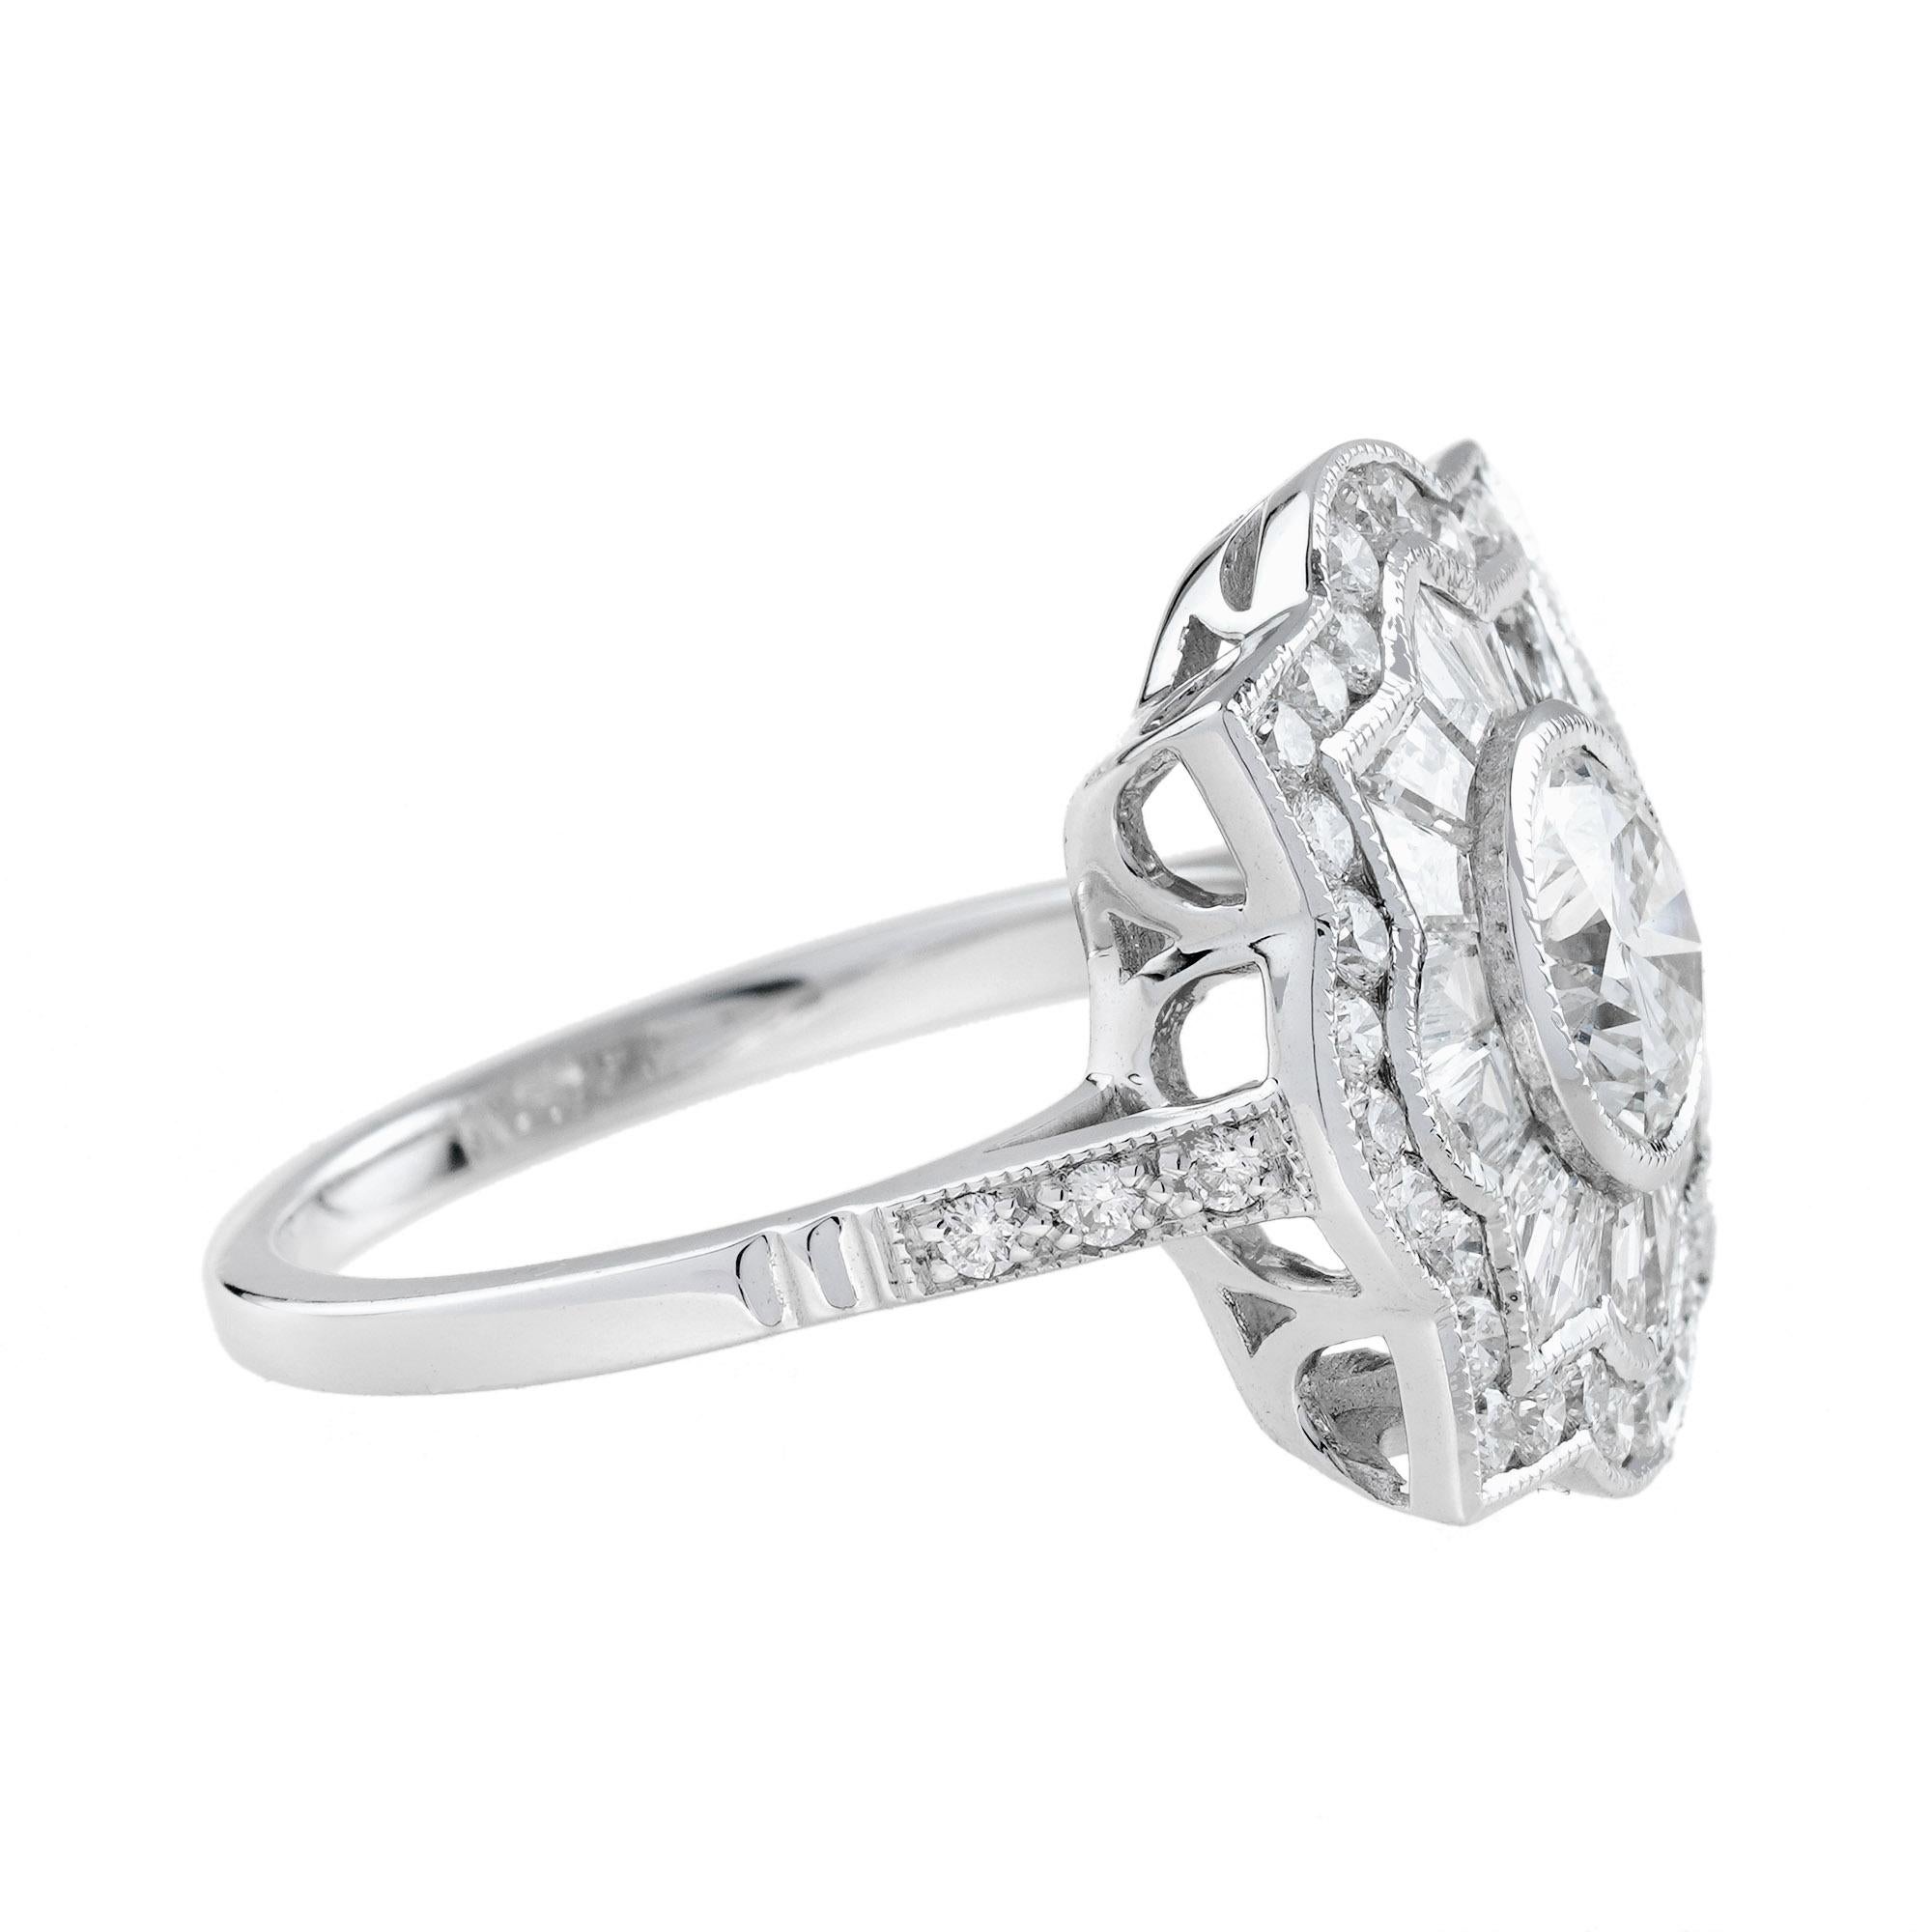 For Sale:  1.00 Ct. Diamond Art Deco Style Target Engagement Ring in 18K White Gold 6